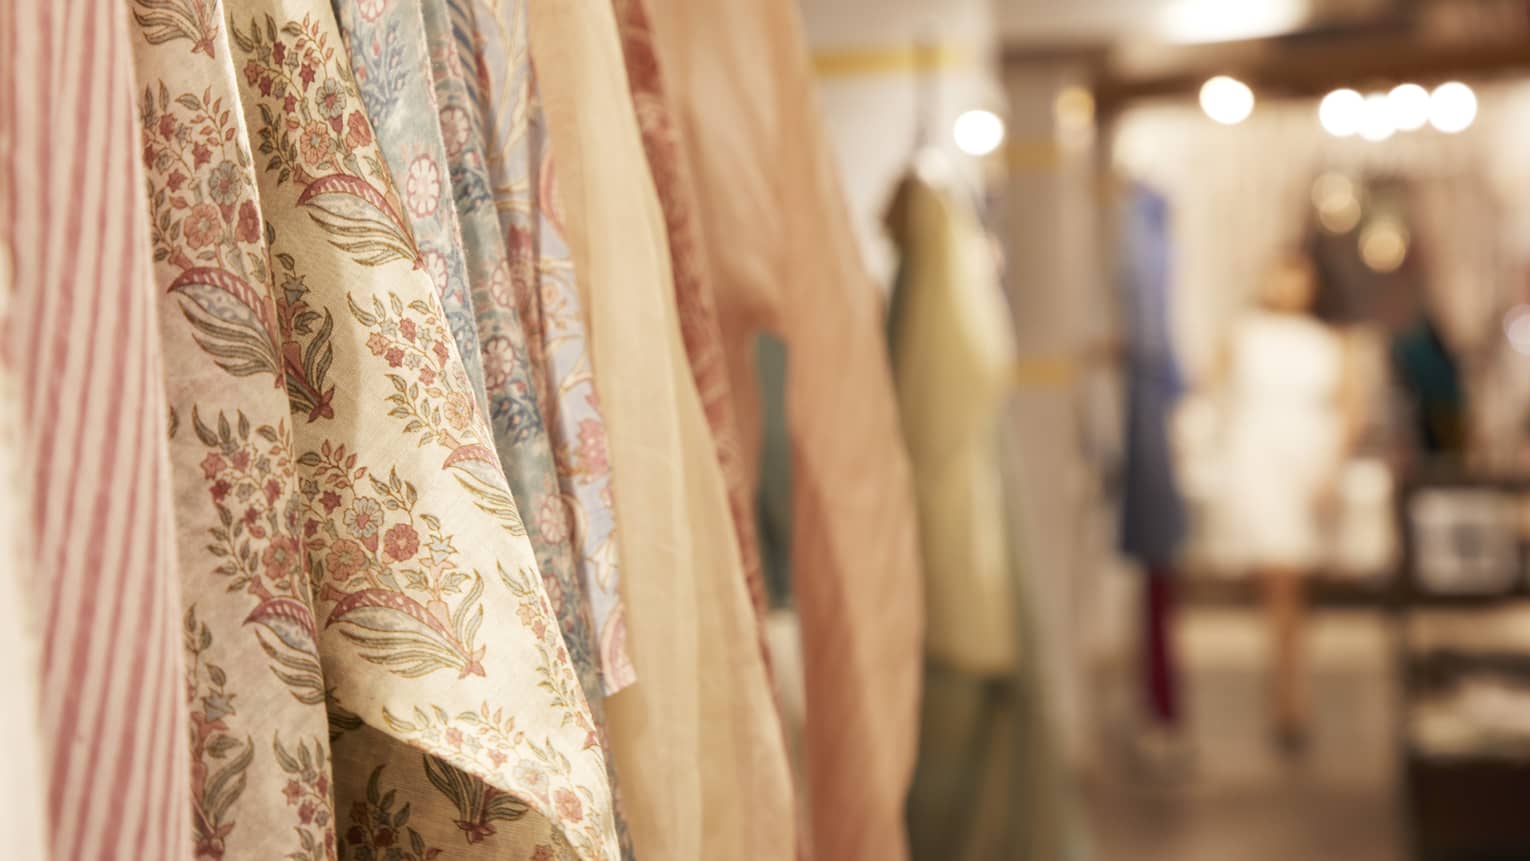 Close up of garment sleeves hanging on a clothing rack, featuring various solid, striped and floral textiles in peach, cream and gold tones